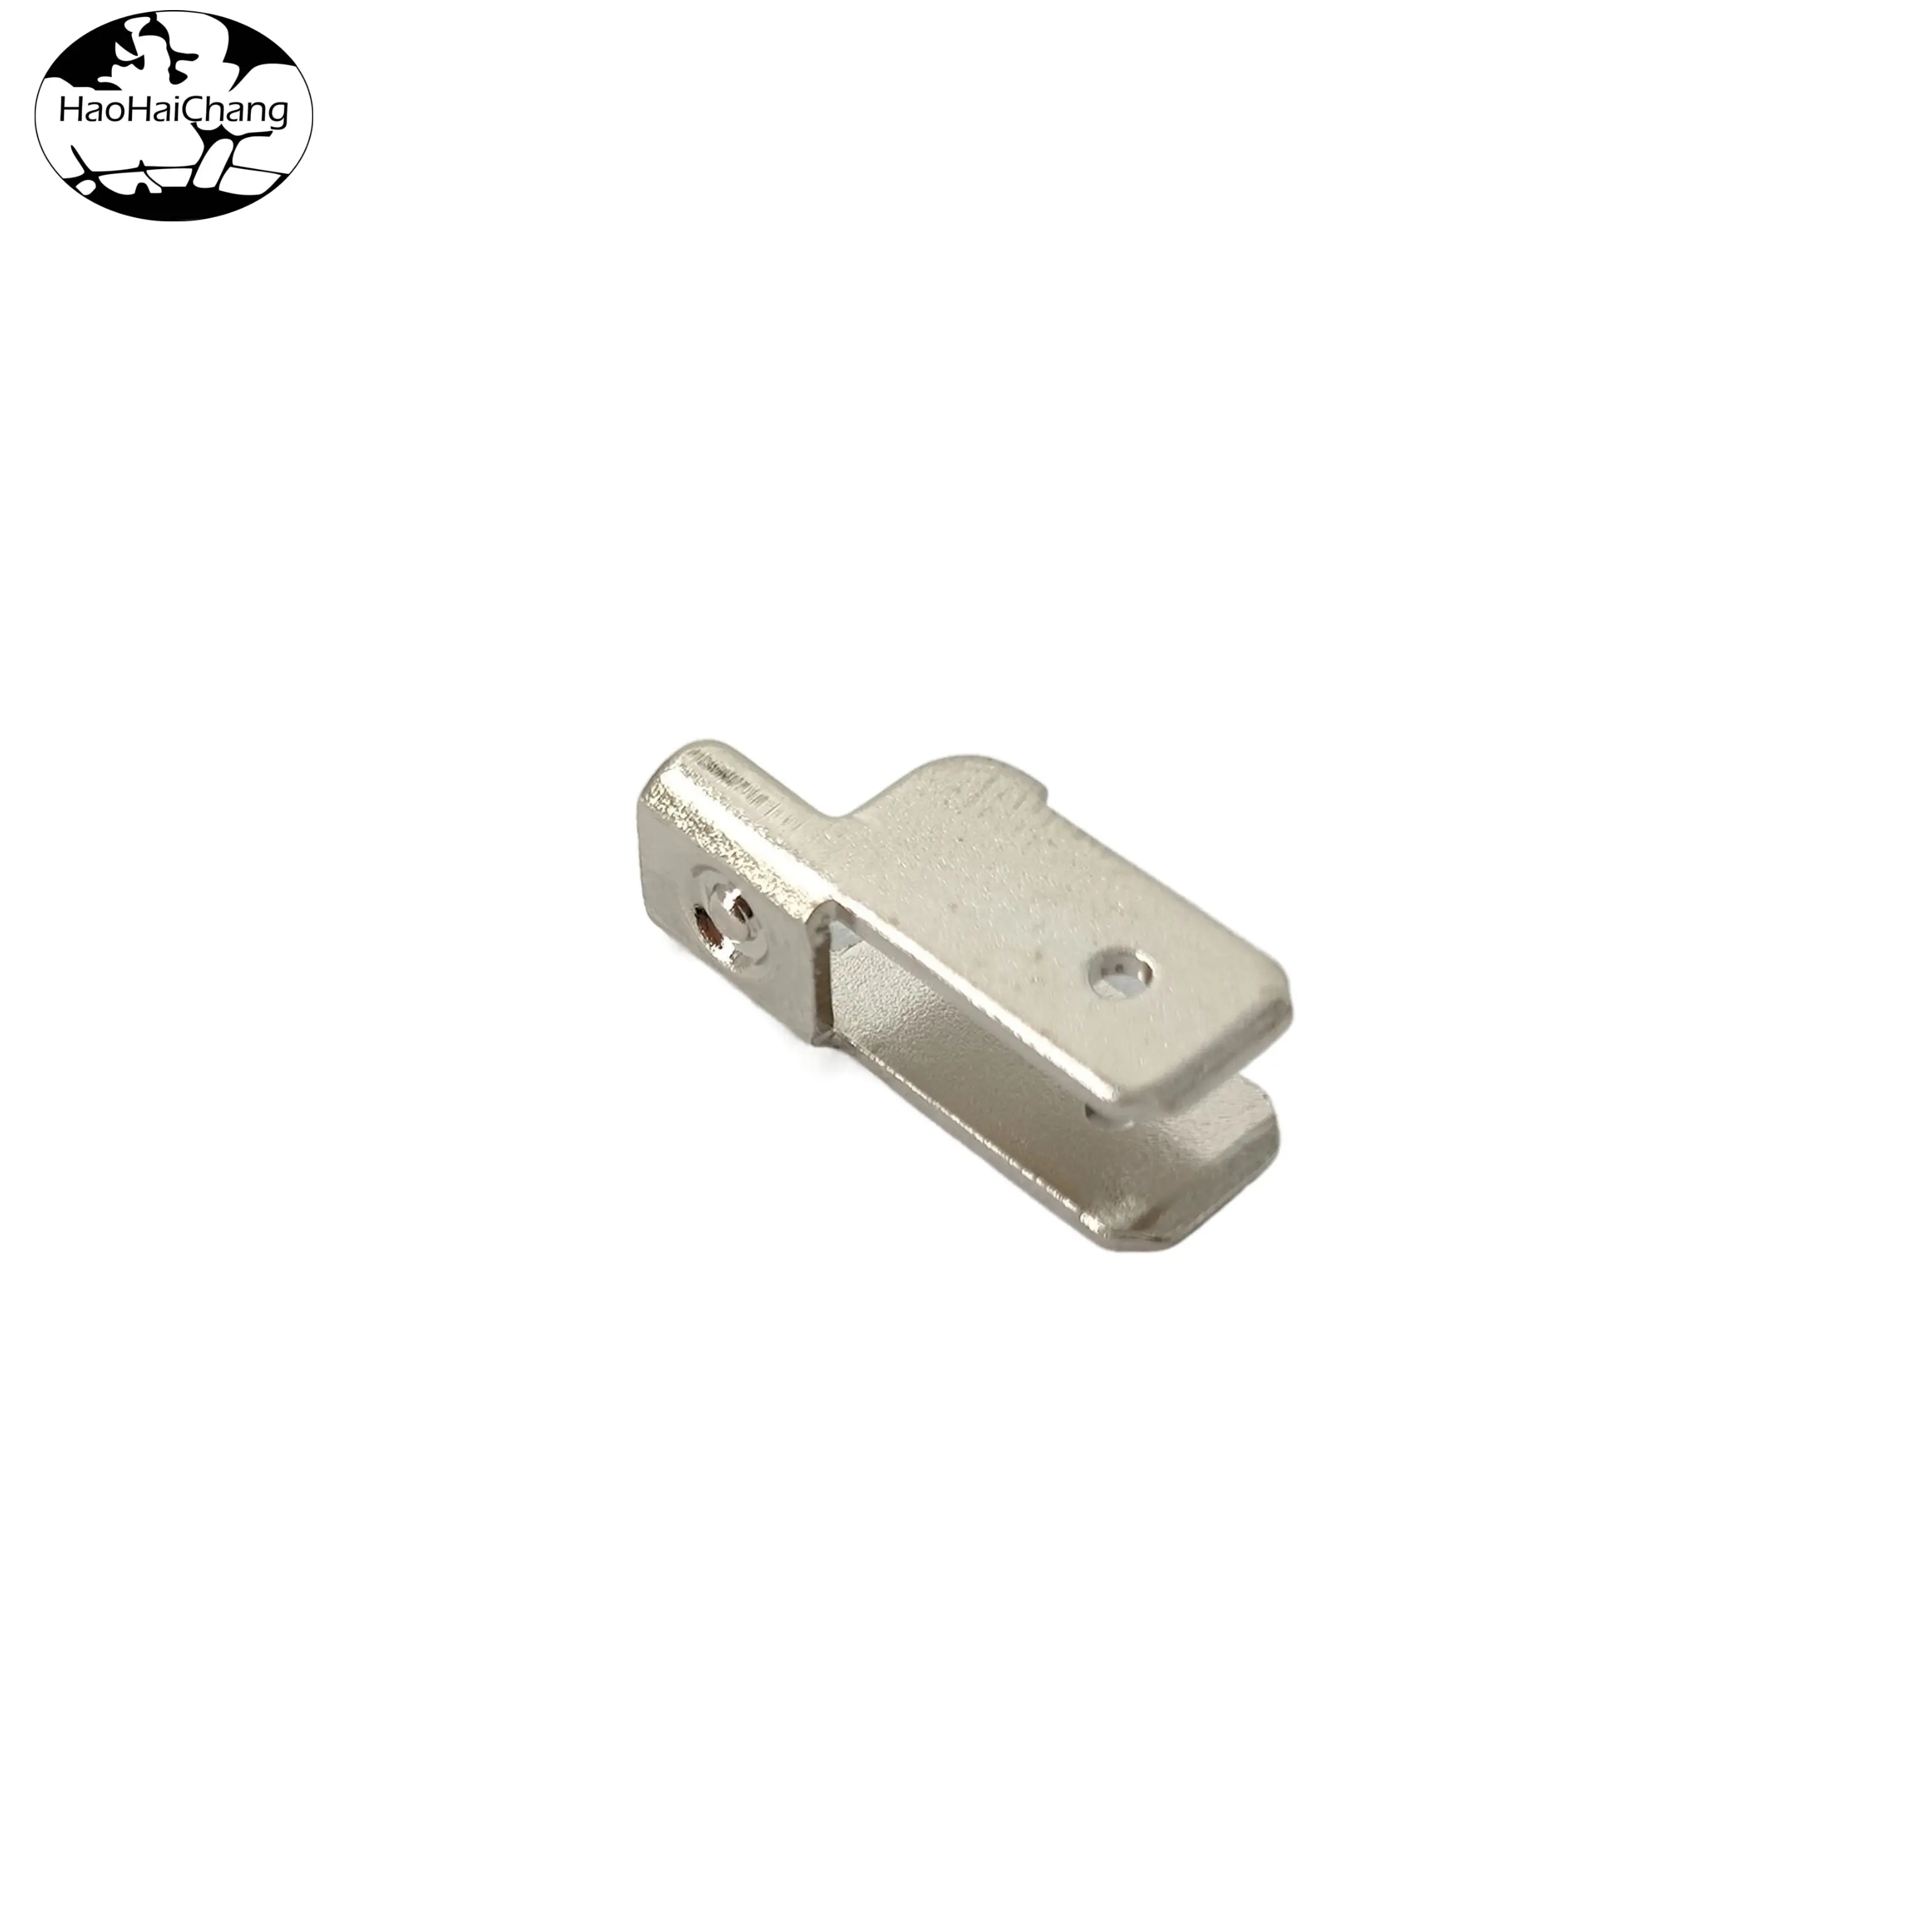 HHC-0228 Connector